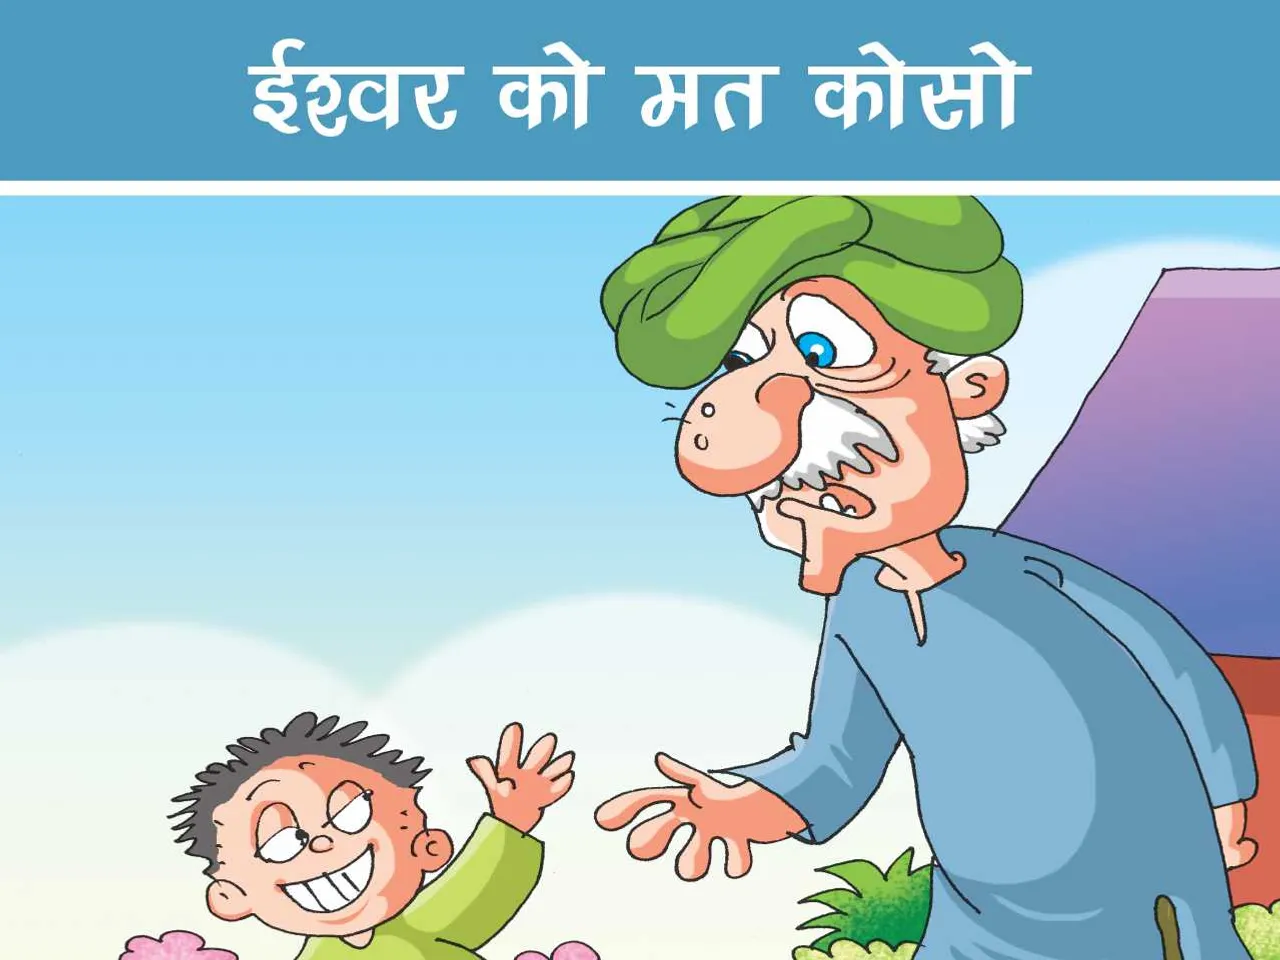 Old man with his grandson cartoon image